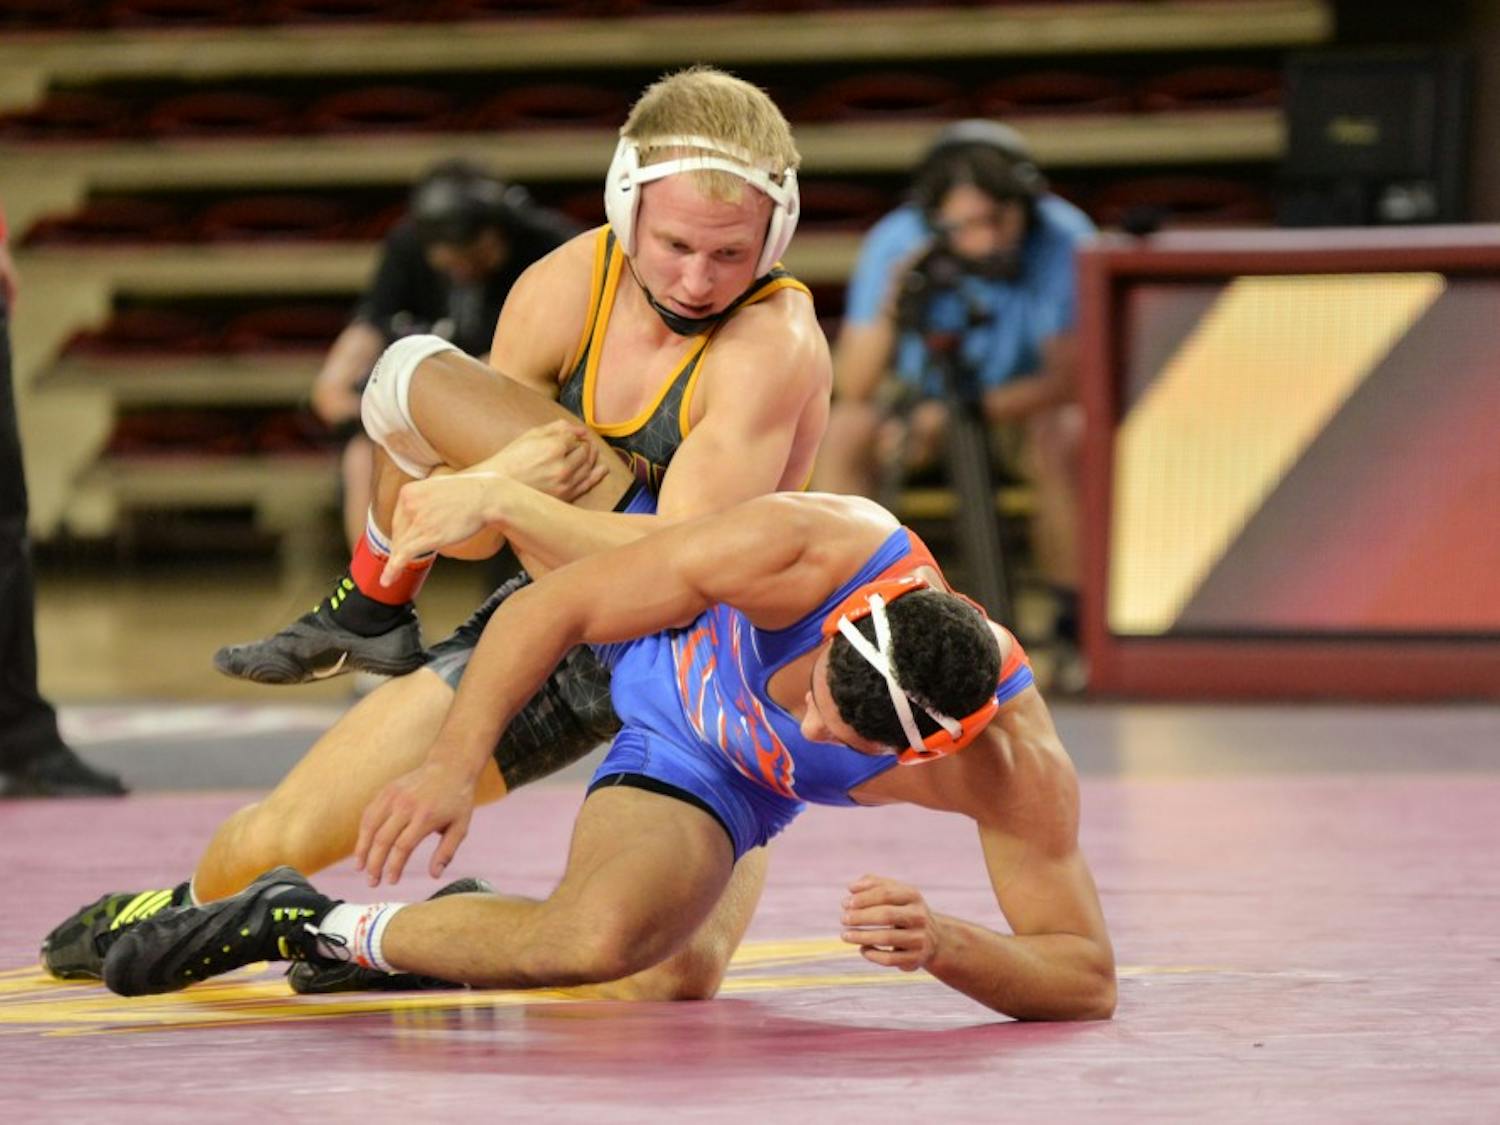 Sun Devil senior Matt Kraus and Geordan Martinez from Boise State take it to the mat during the final match between the two schools on Sunday, Nov. 21, at the Wells Fargo Arena in Tempe, AZ.